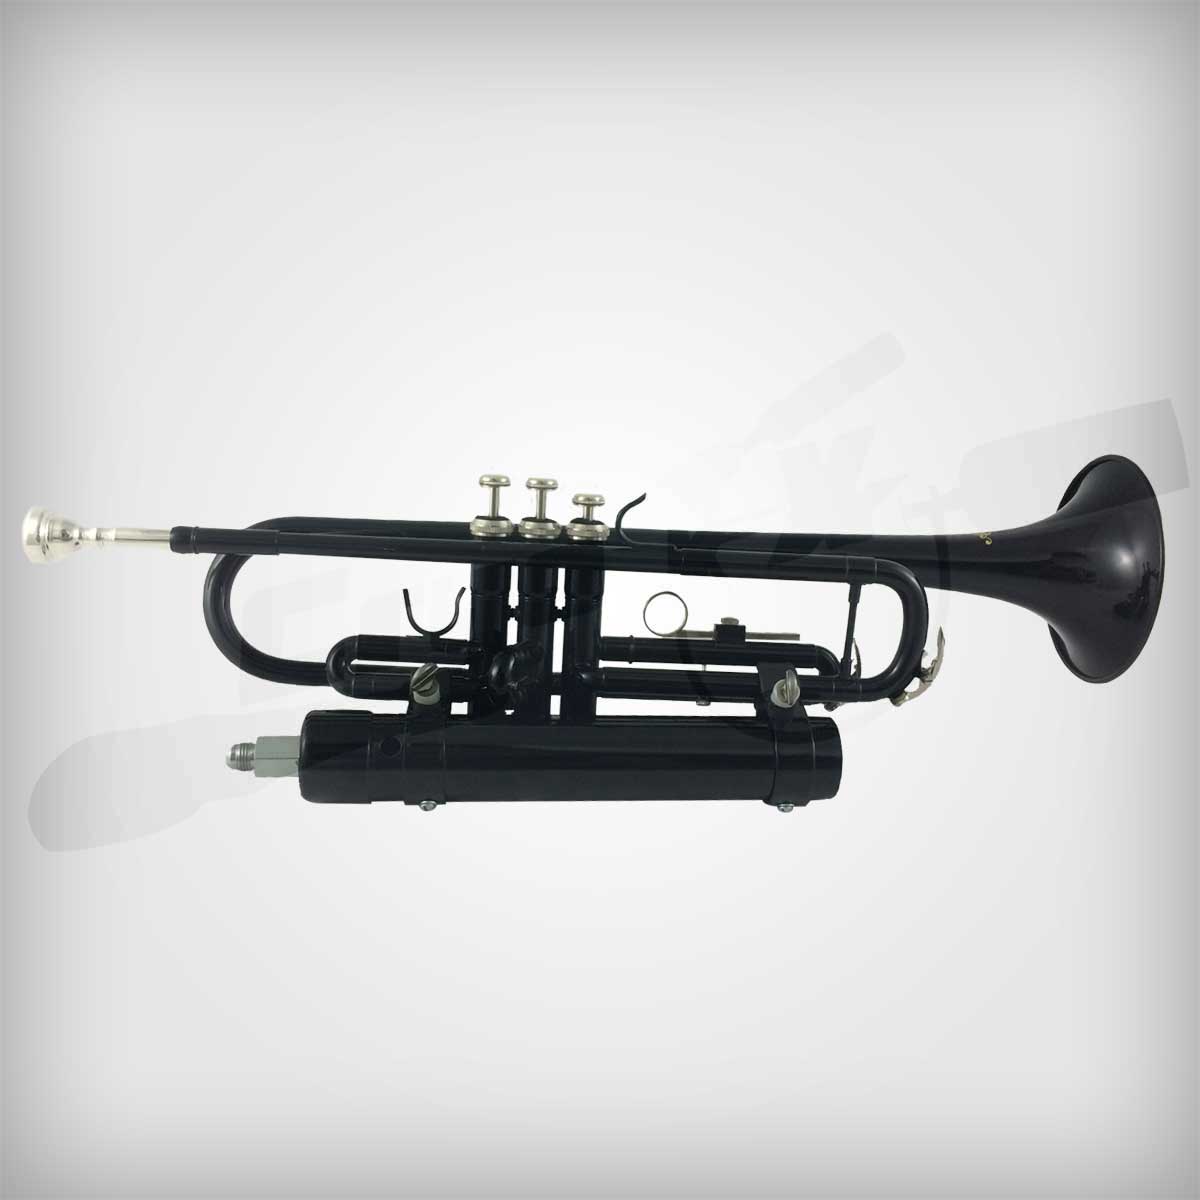 Custom CO2 Special Effects Built FX Equipment - Custom Smoke FX Trumpet by CryoFX®